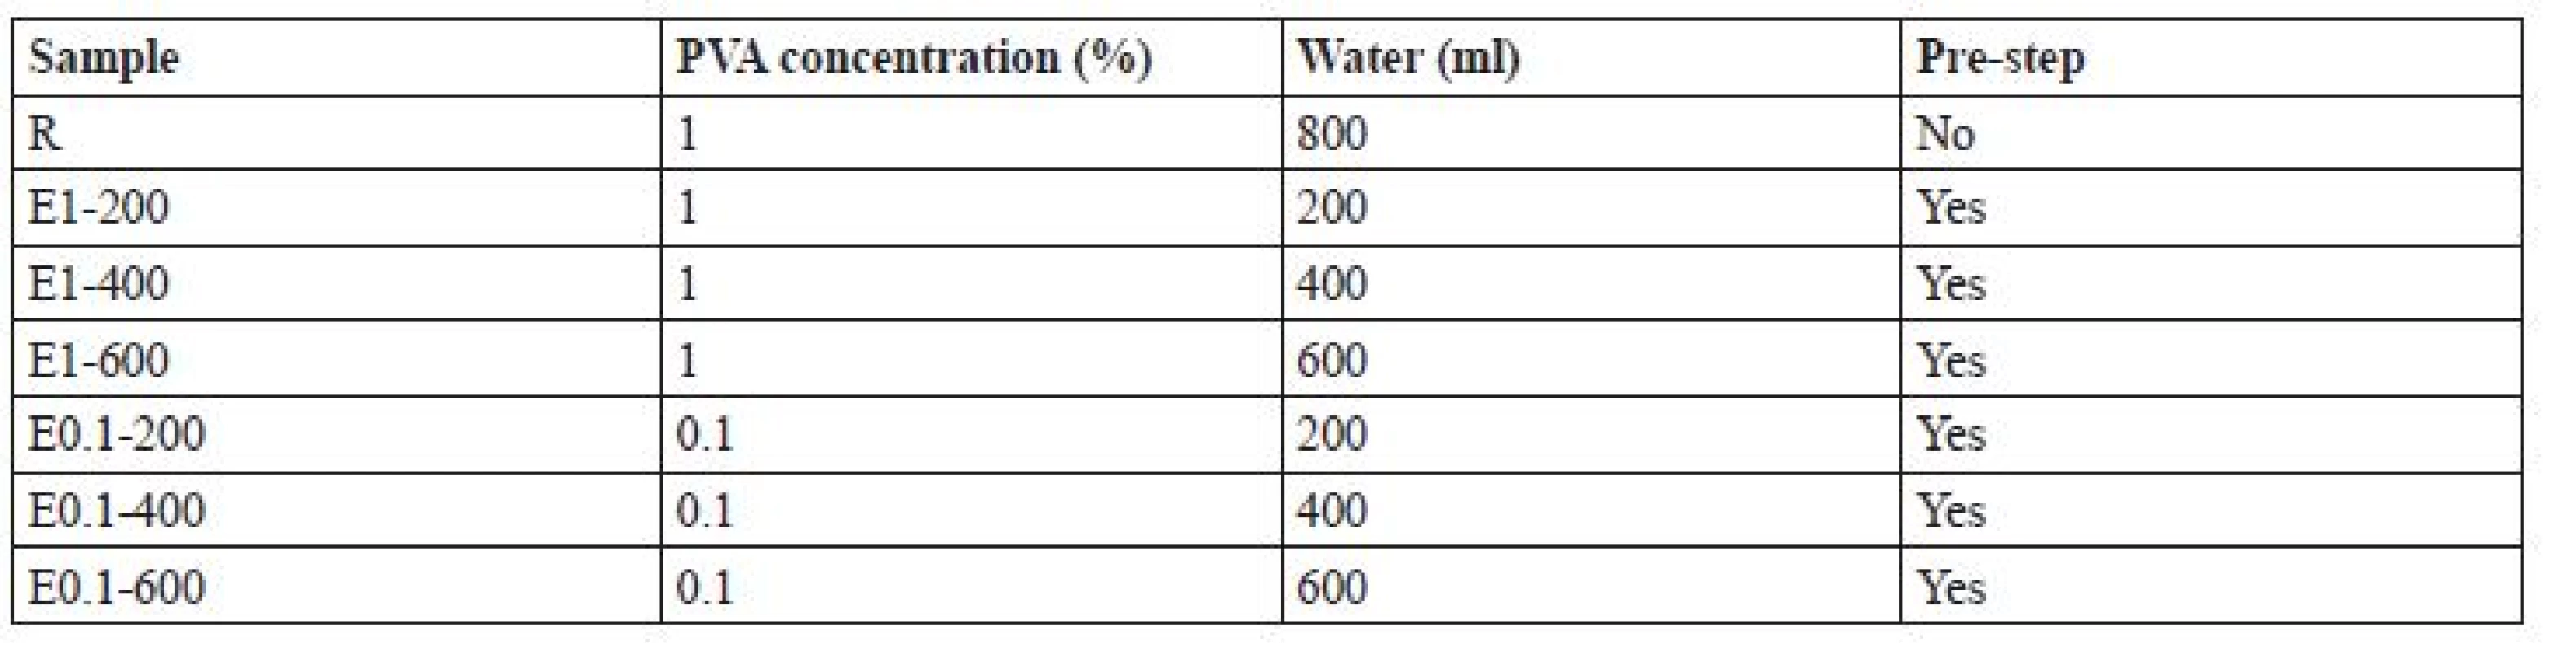 Preparation characteristics of microparticle samples